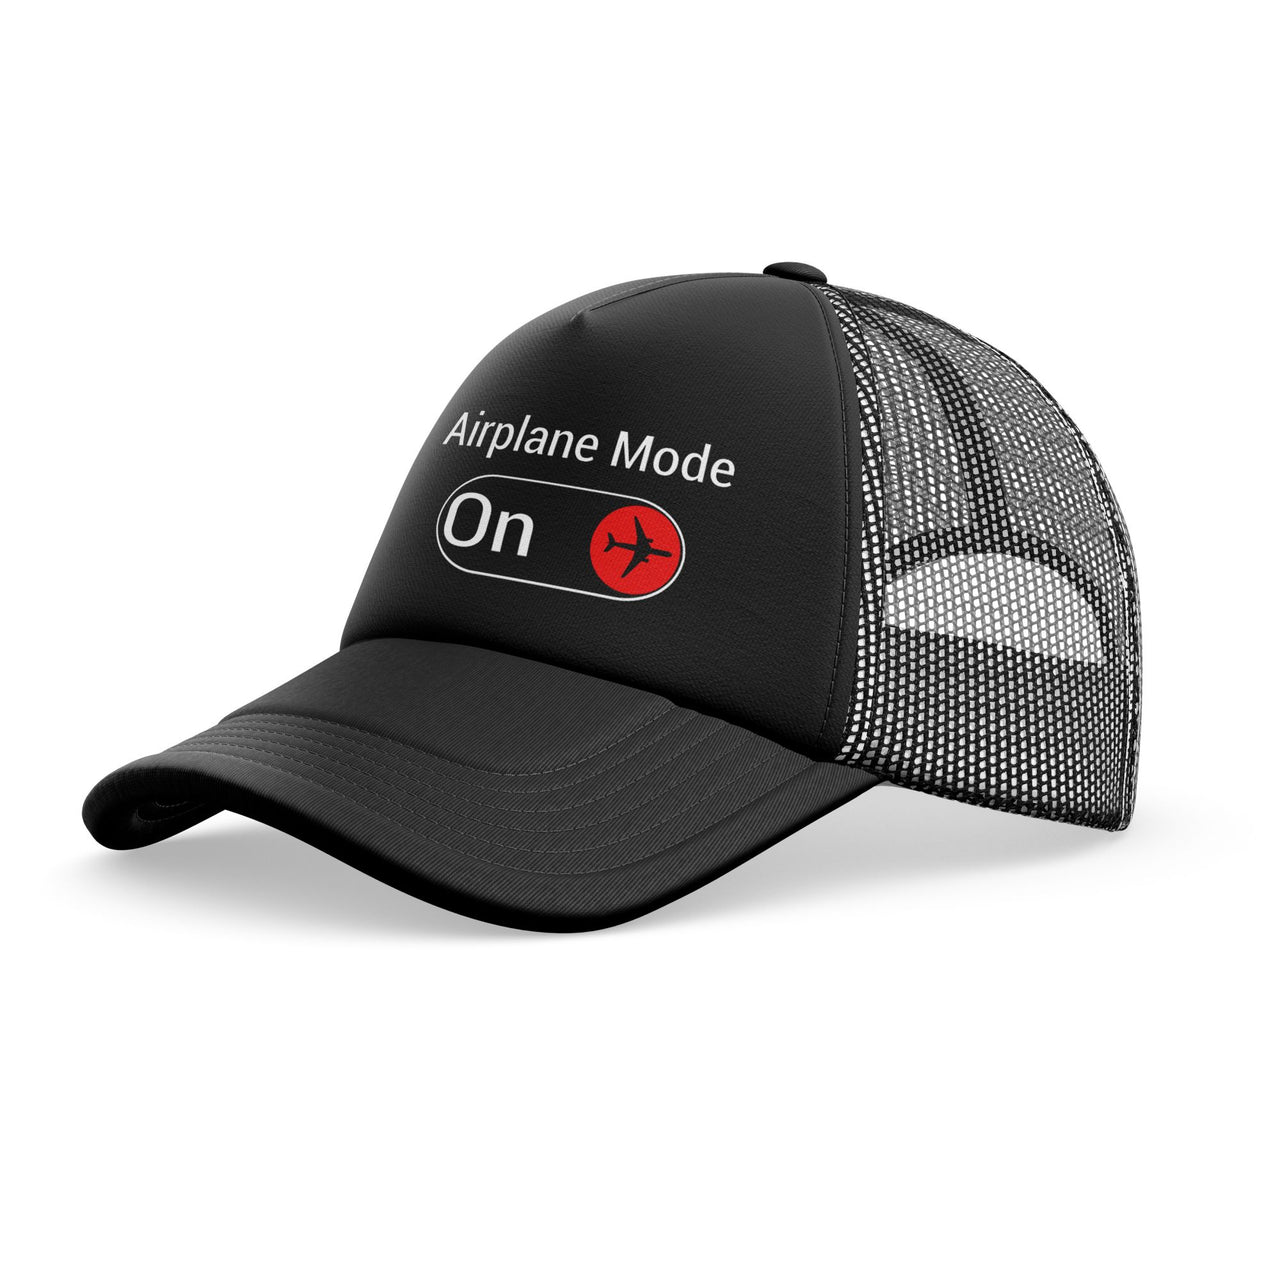 Airplane Mode On Designed Trucker Caps & Hats